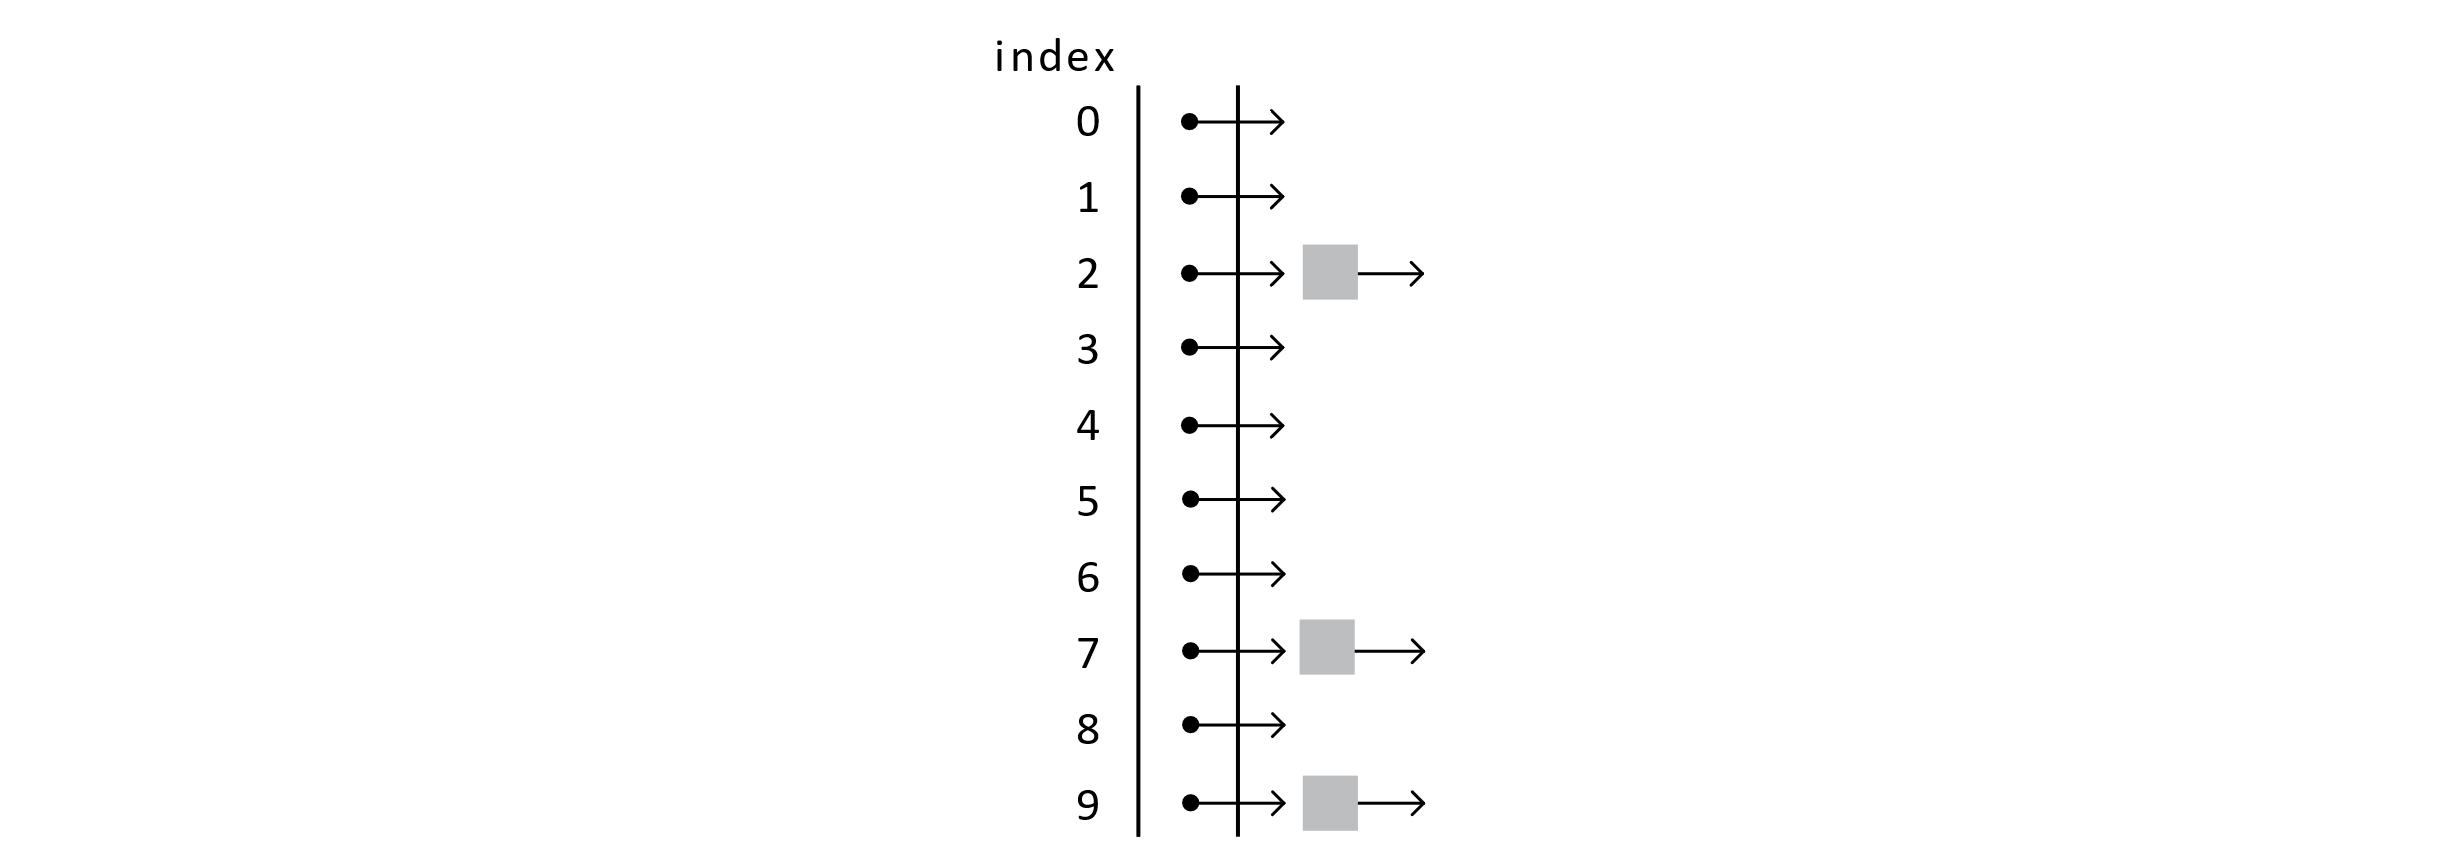 An array of linked lists with 10 lists numbered 0 through 9. The lists in position 2, 7, and 9 have a single element.